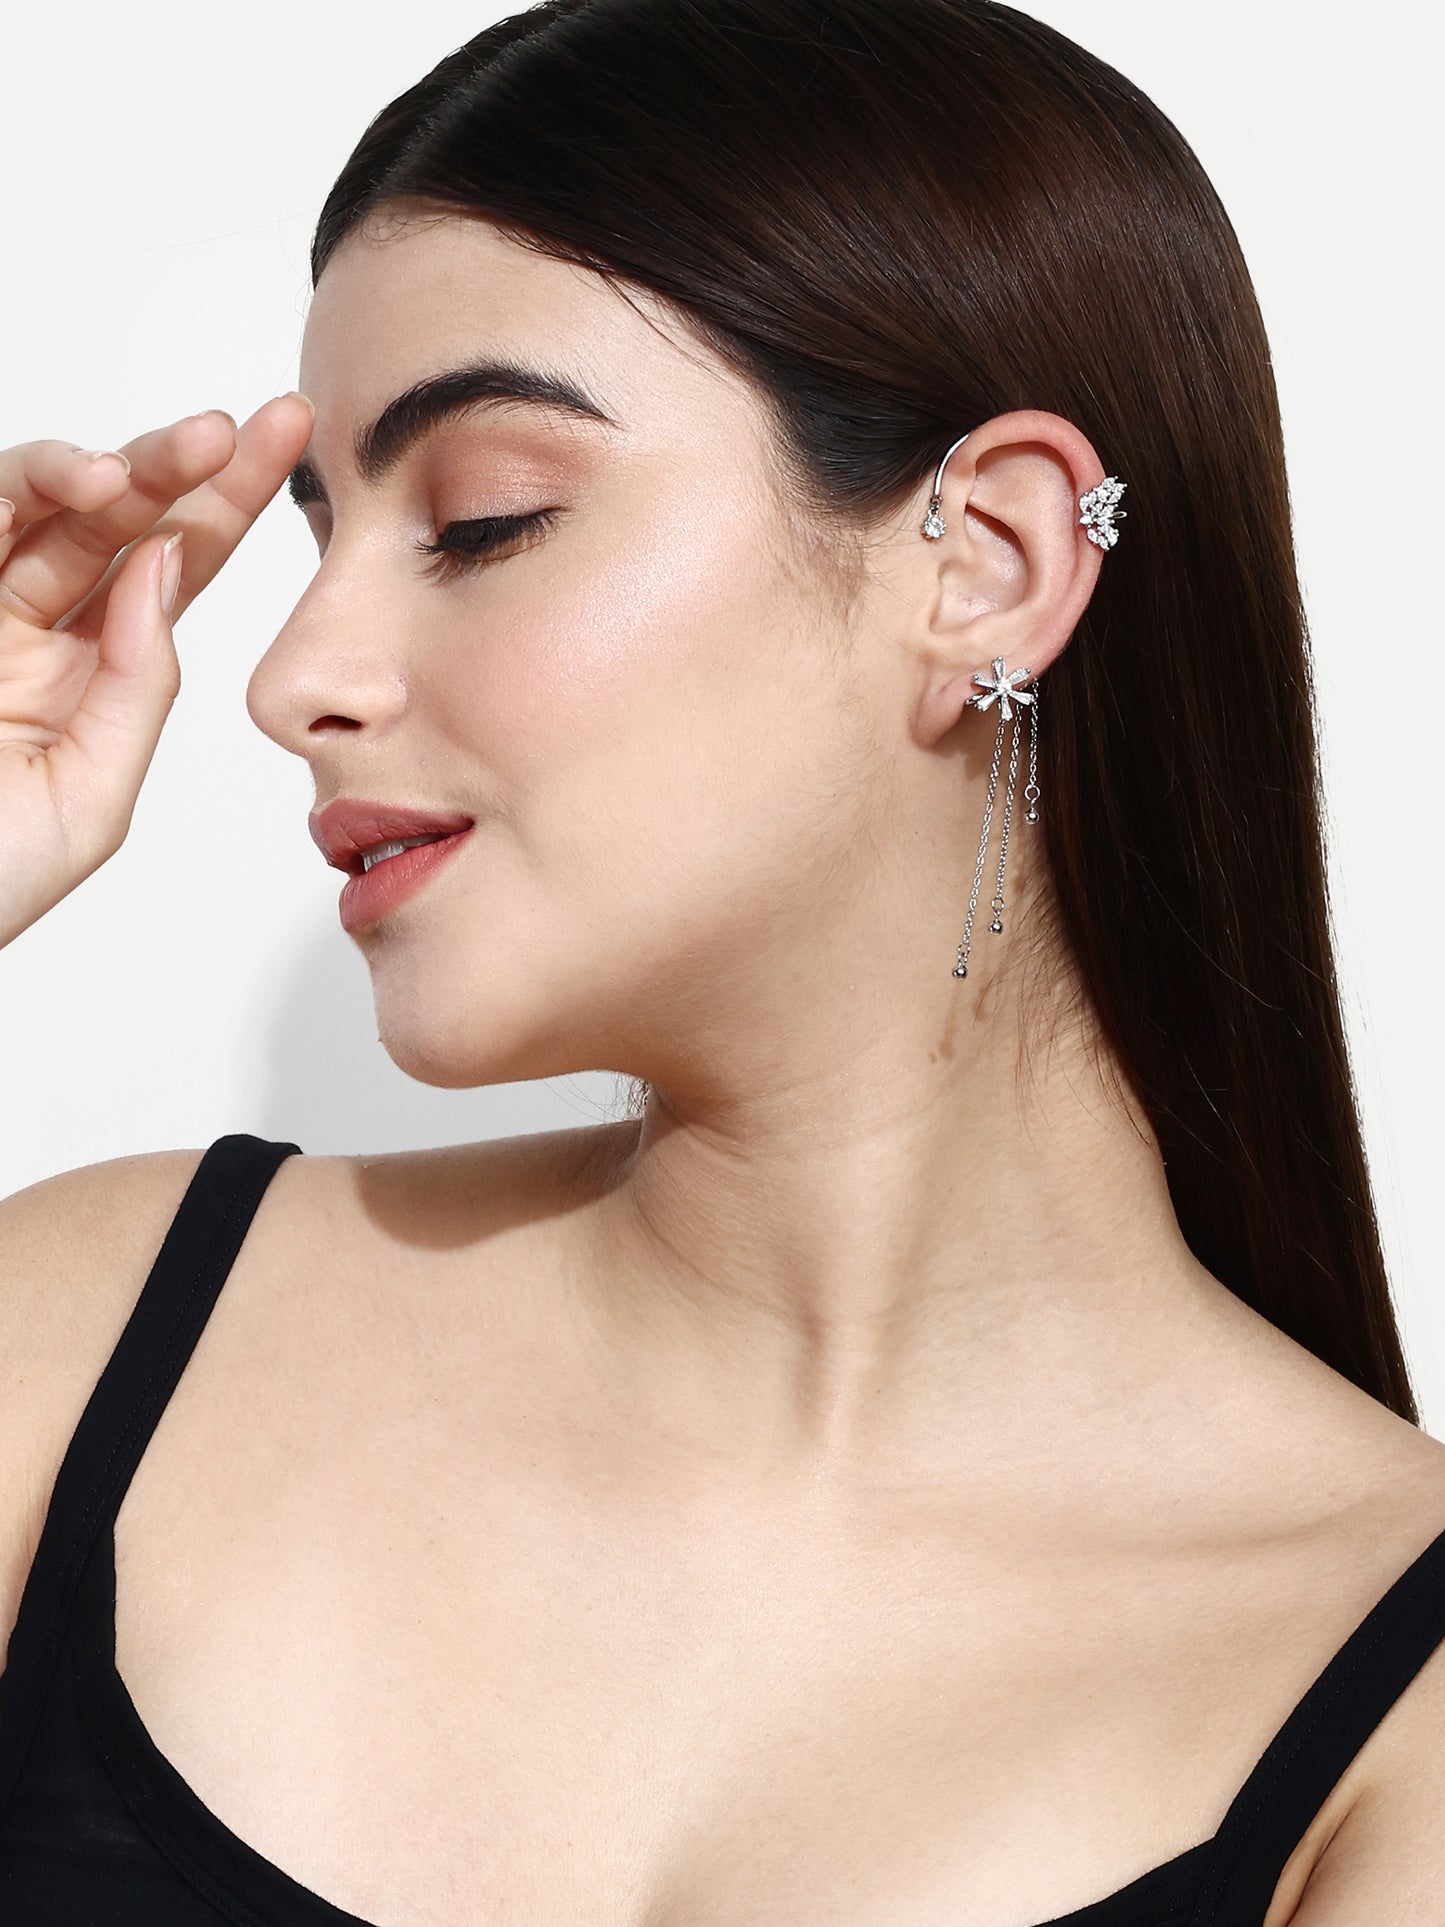 Turn all day Ear cuffs with Droplets white gold